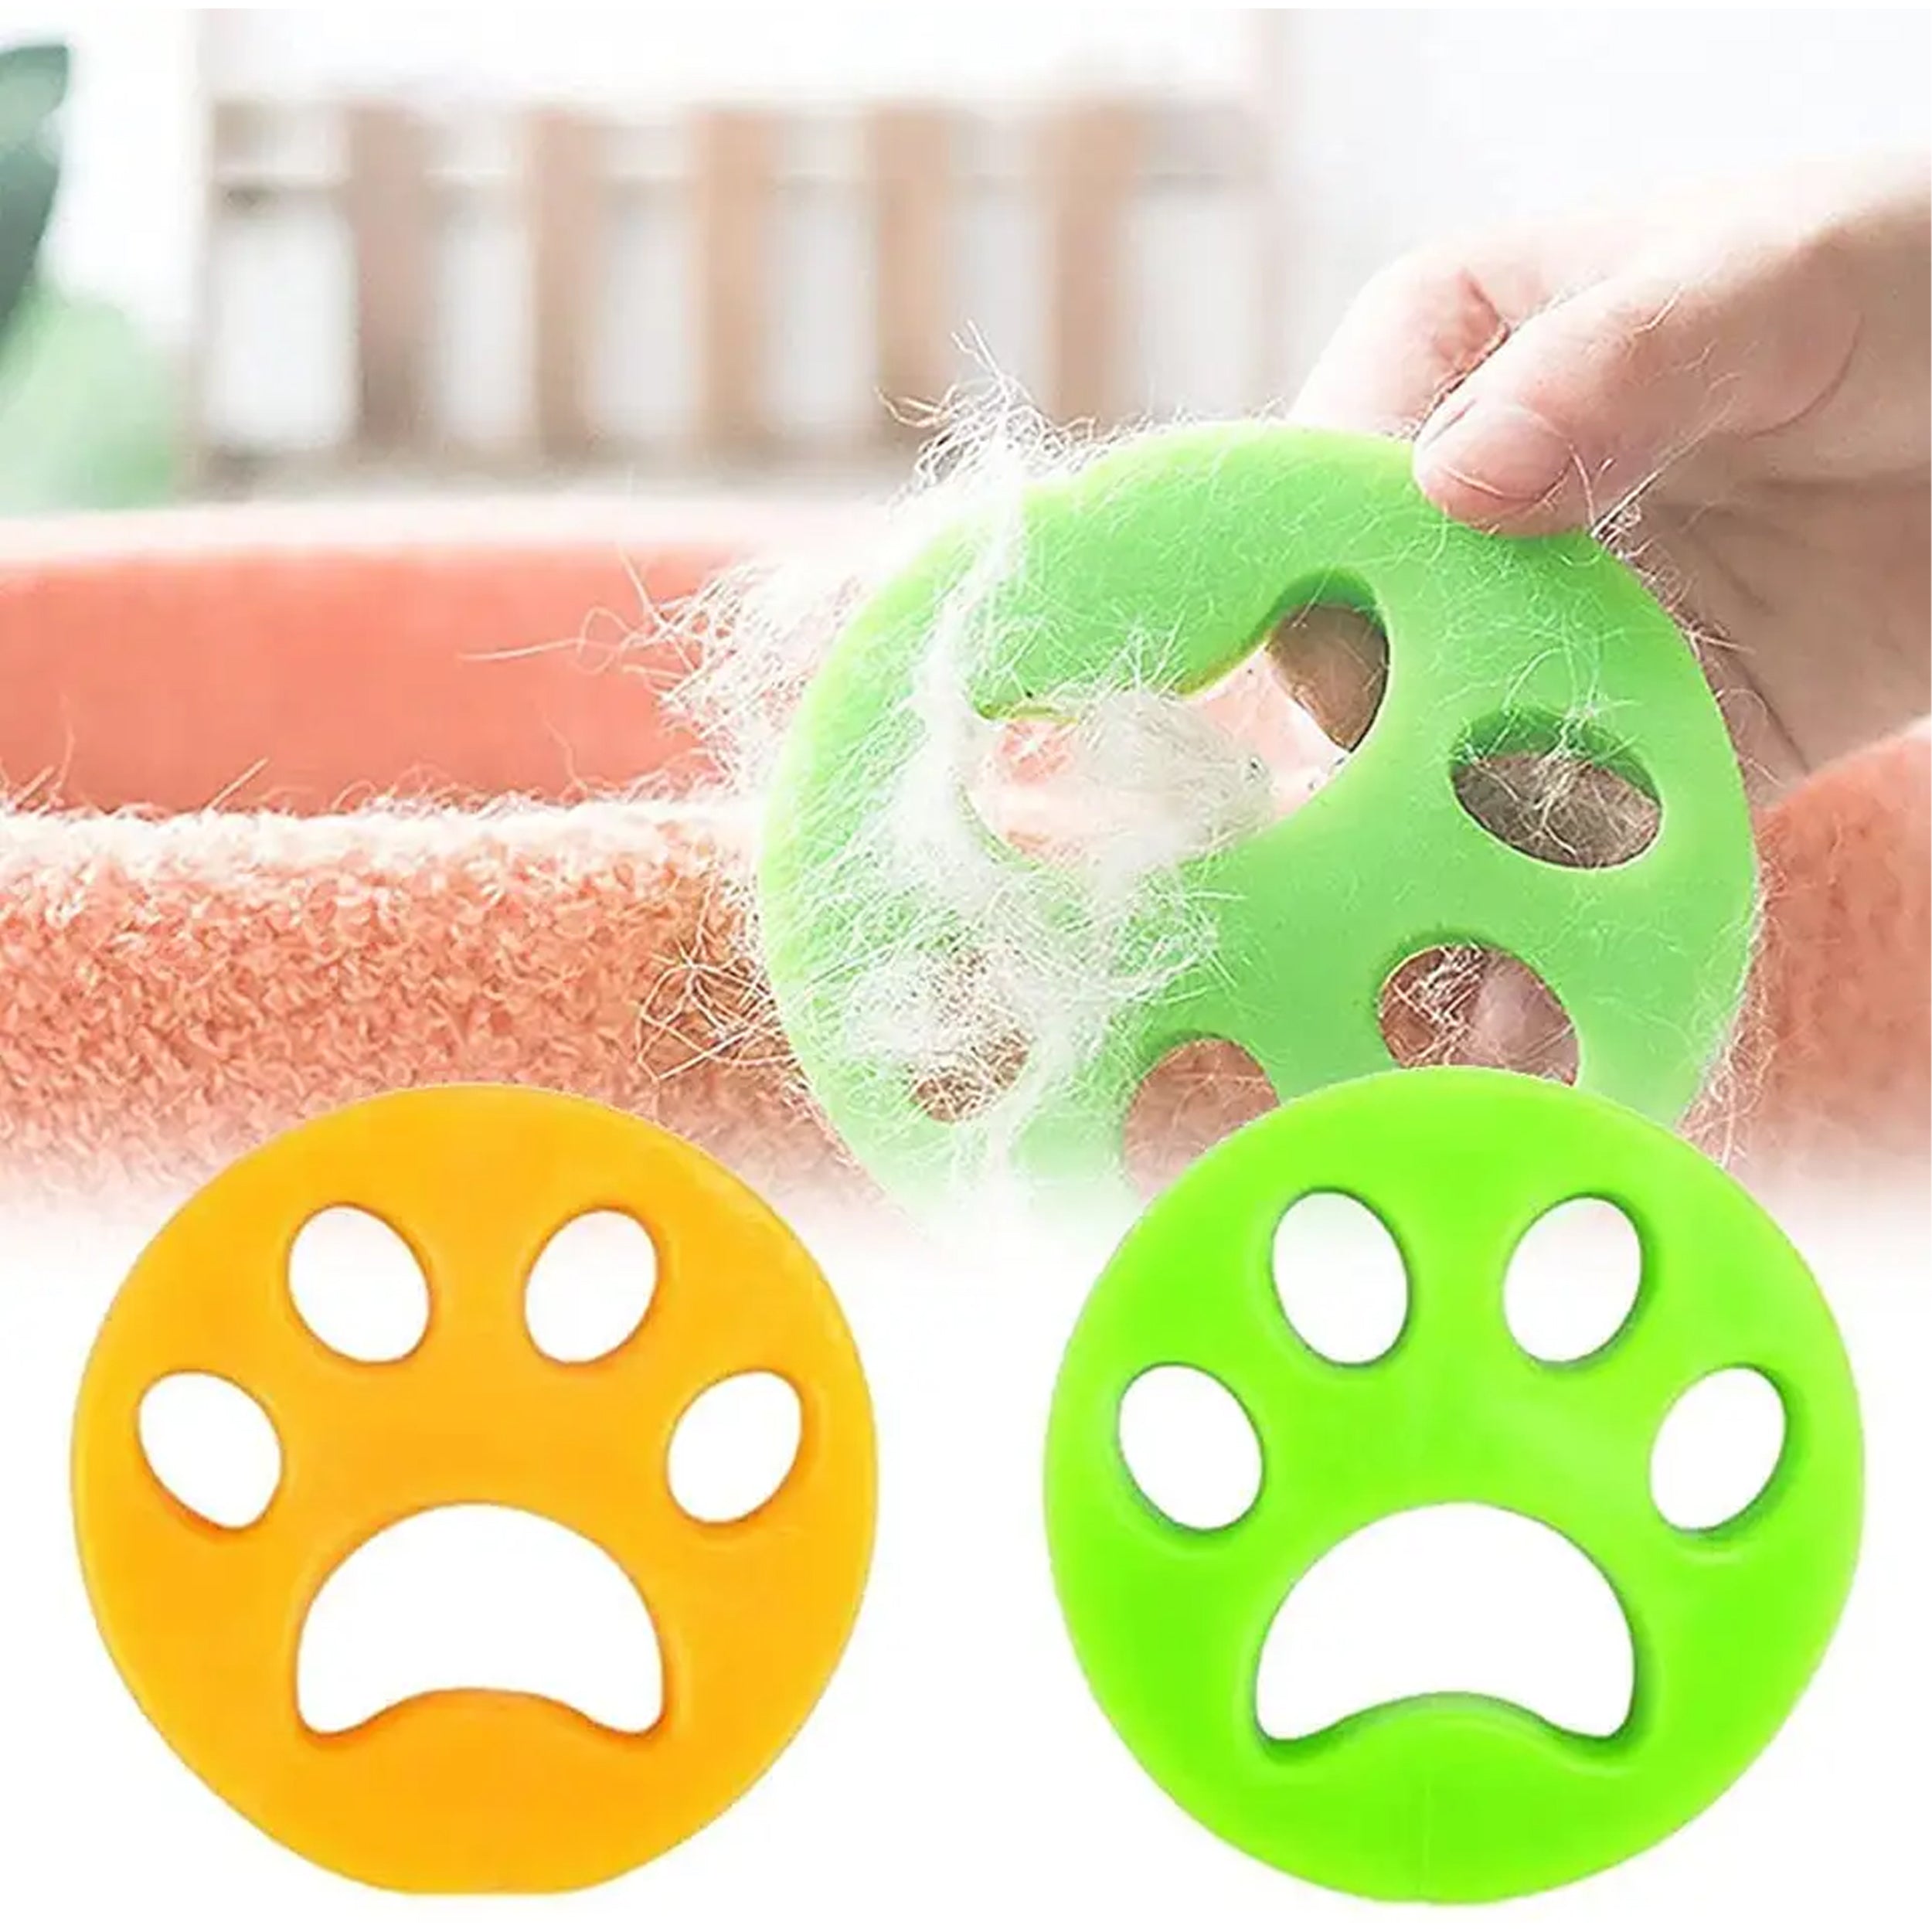 Pet Hair Remover Washing Machine,Hair Catcher for Laundry